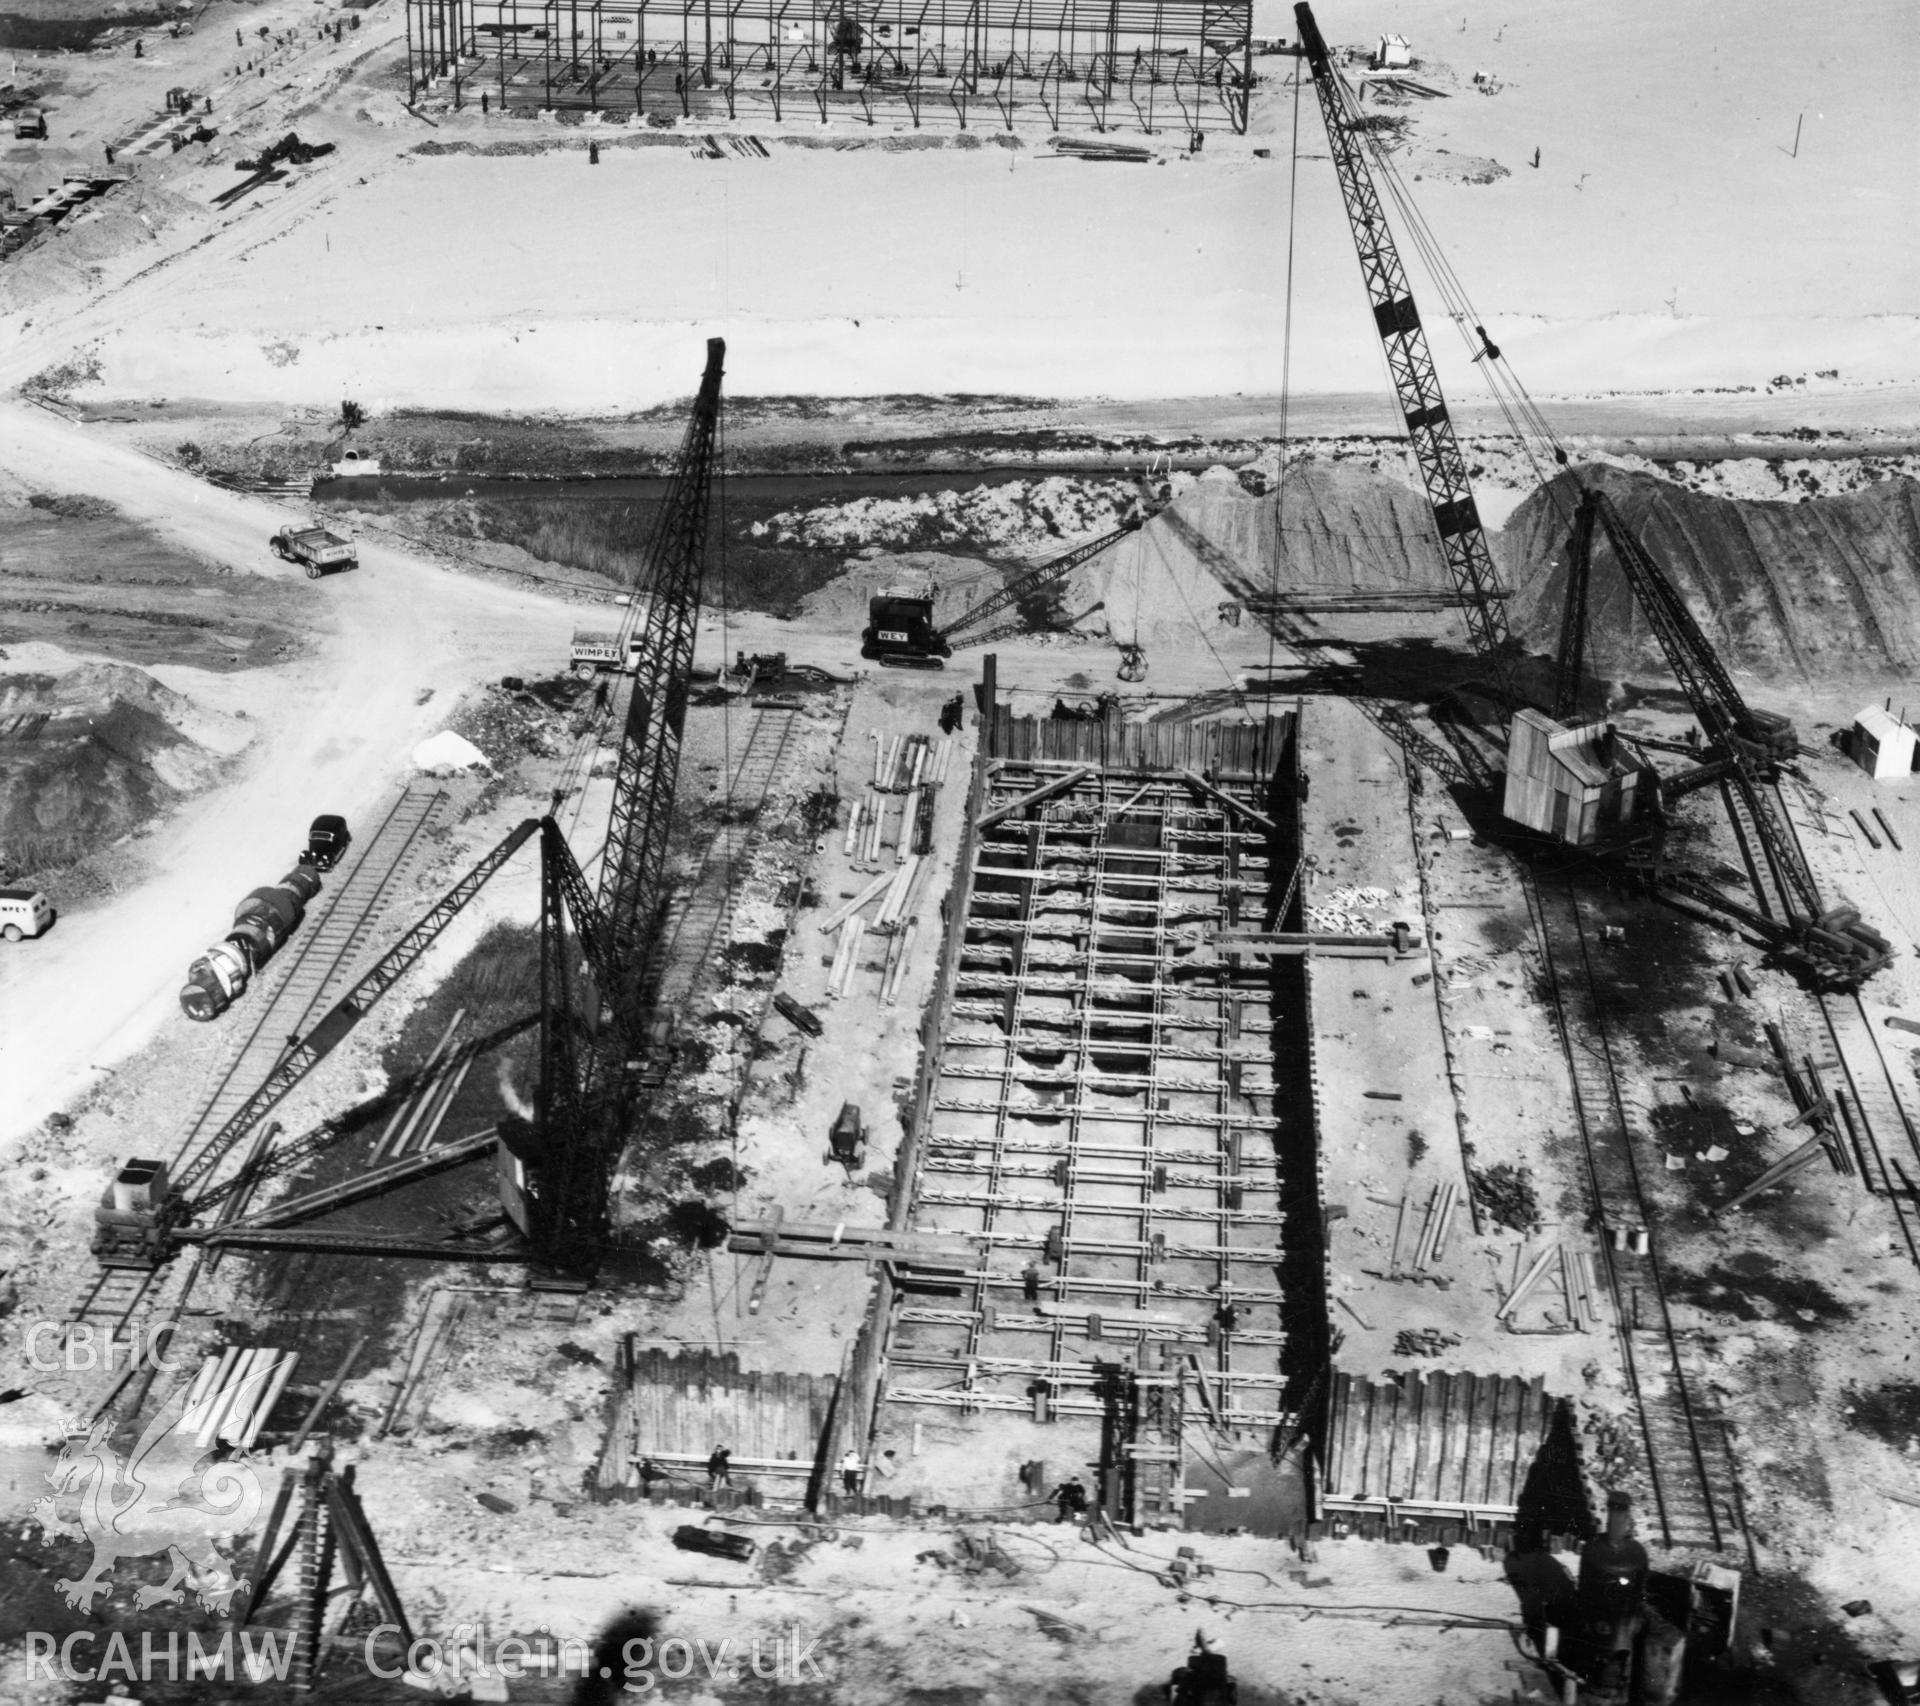 View of Abbey Steelworks, Port Talbot, under construction. Oblique aerial photograph, 5?" cut roll film.